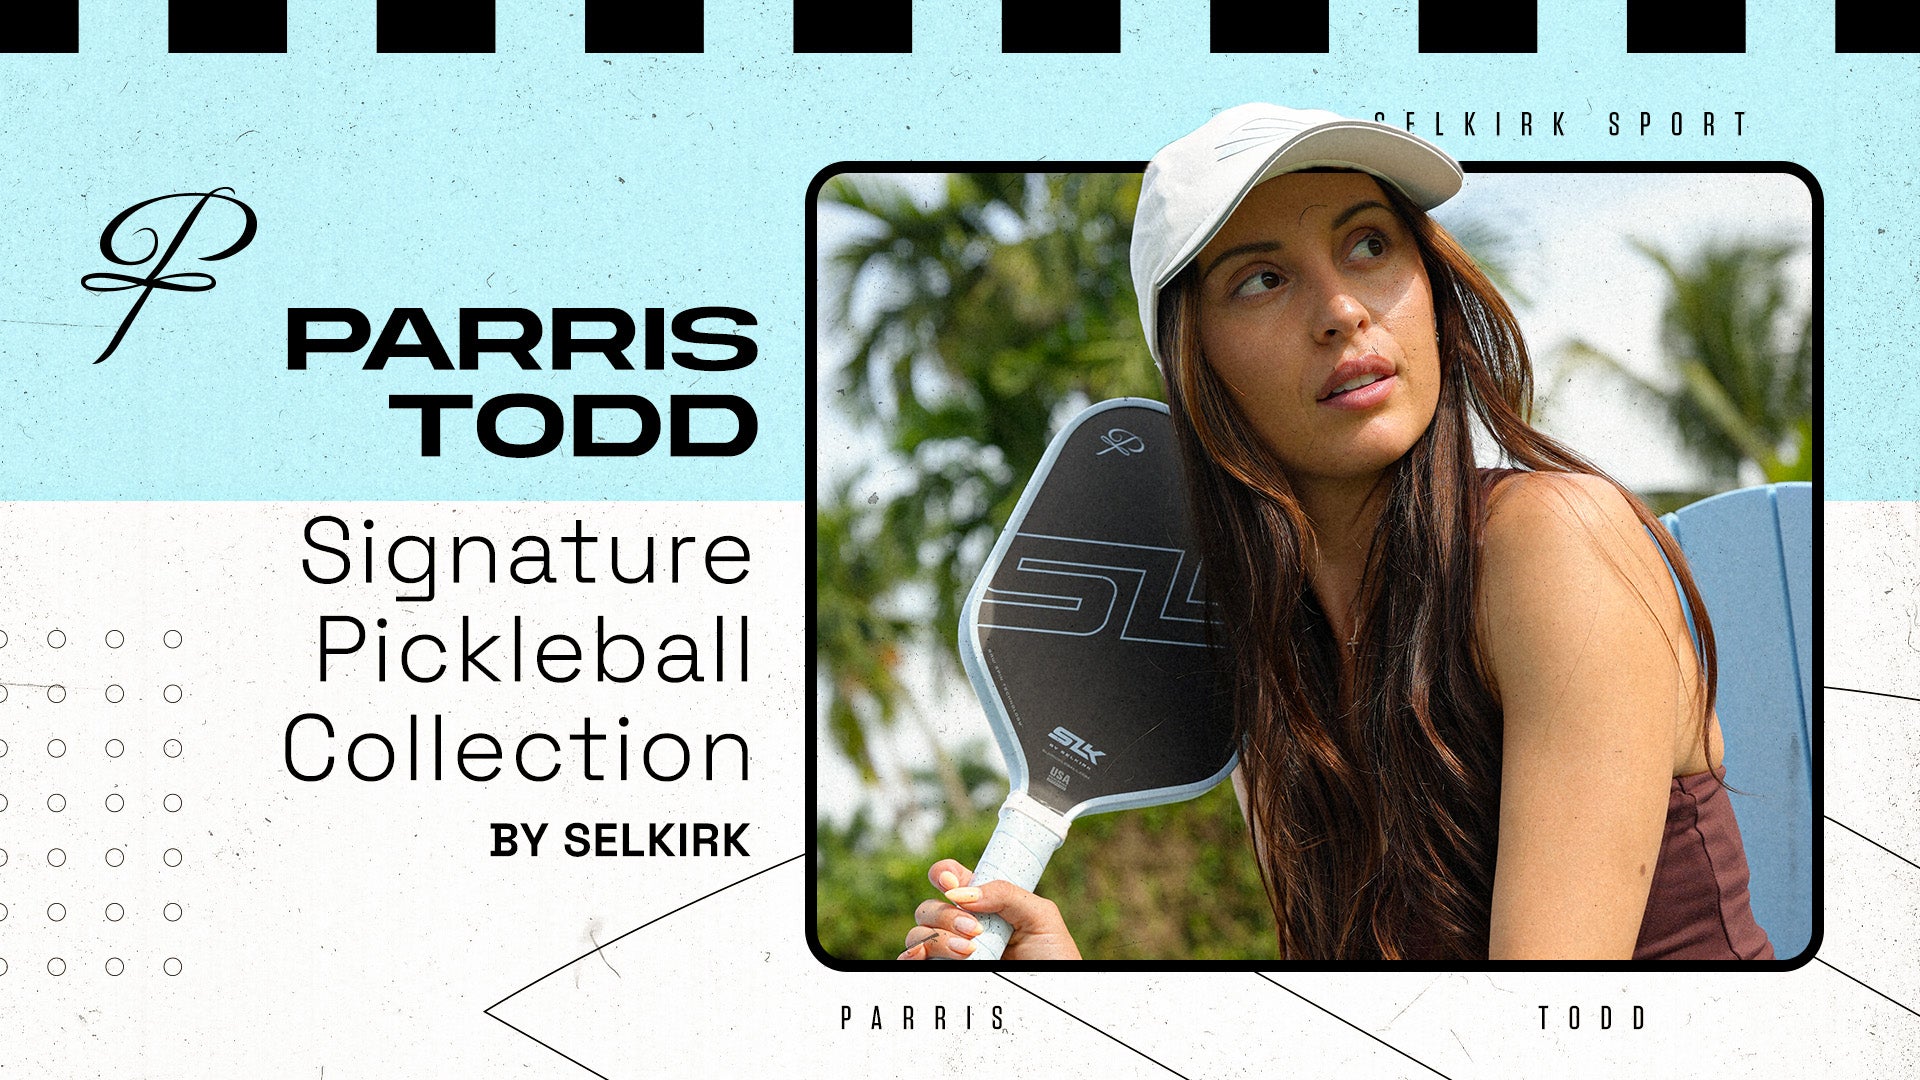 The Parris Todd Signature Pickleball Collection by Selkirk